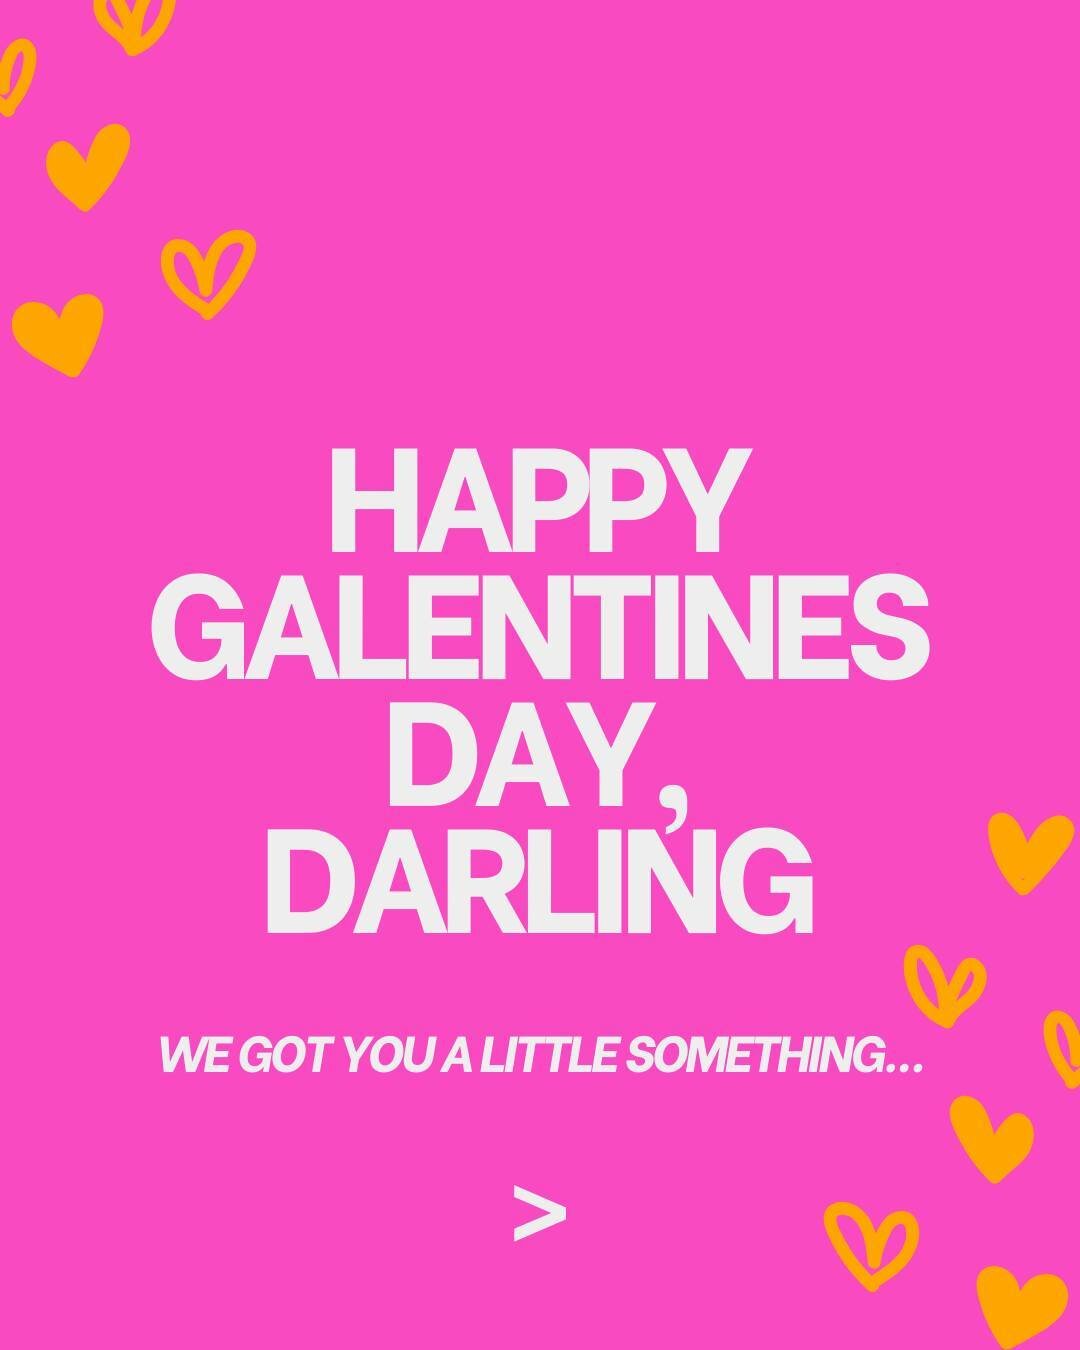 Happy Galentines Day, lovers 🧡

We have a little something for you to celebrate love, gals in business and marketing. 

Jump in quick! xo